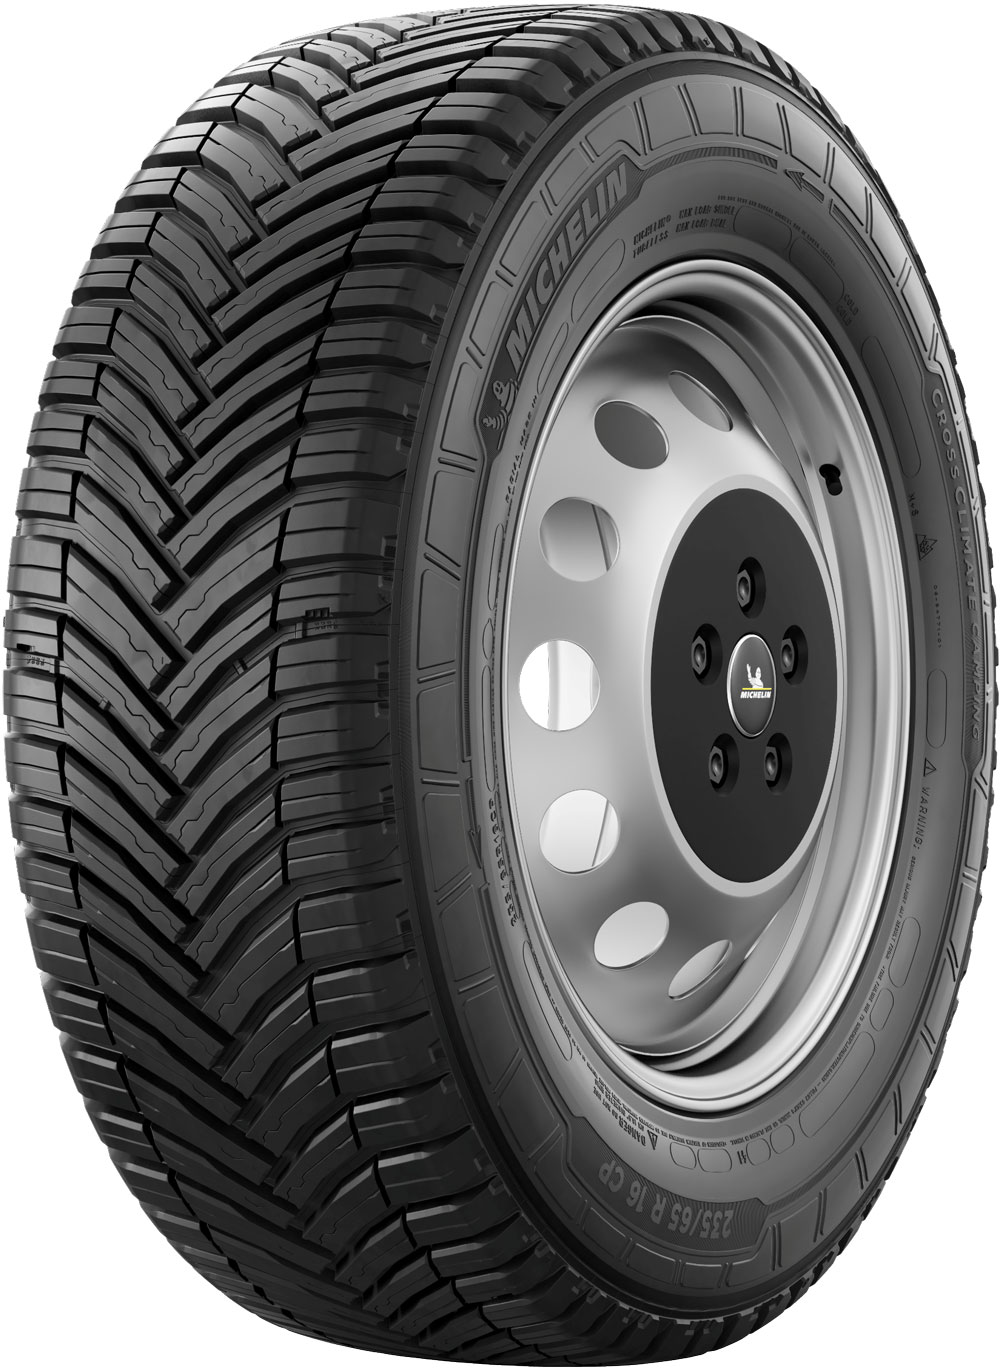 MICHELIN CROSSCLIMATE CAMPING 215/75 R16 114R